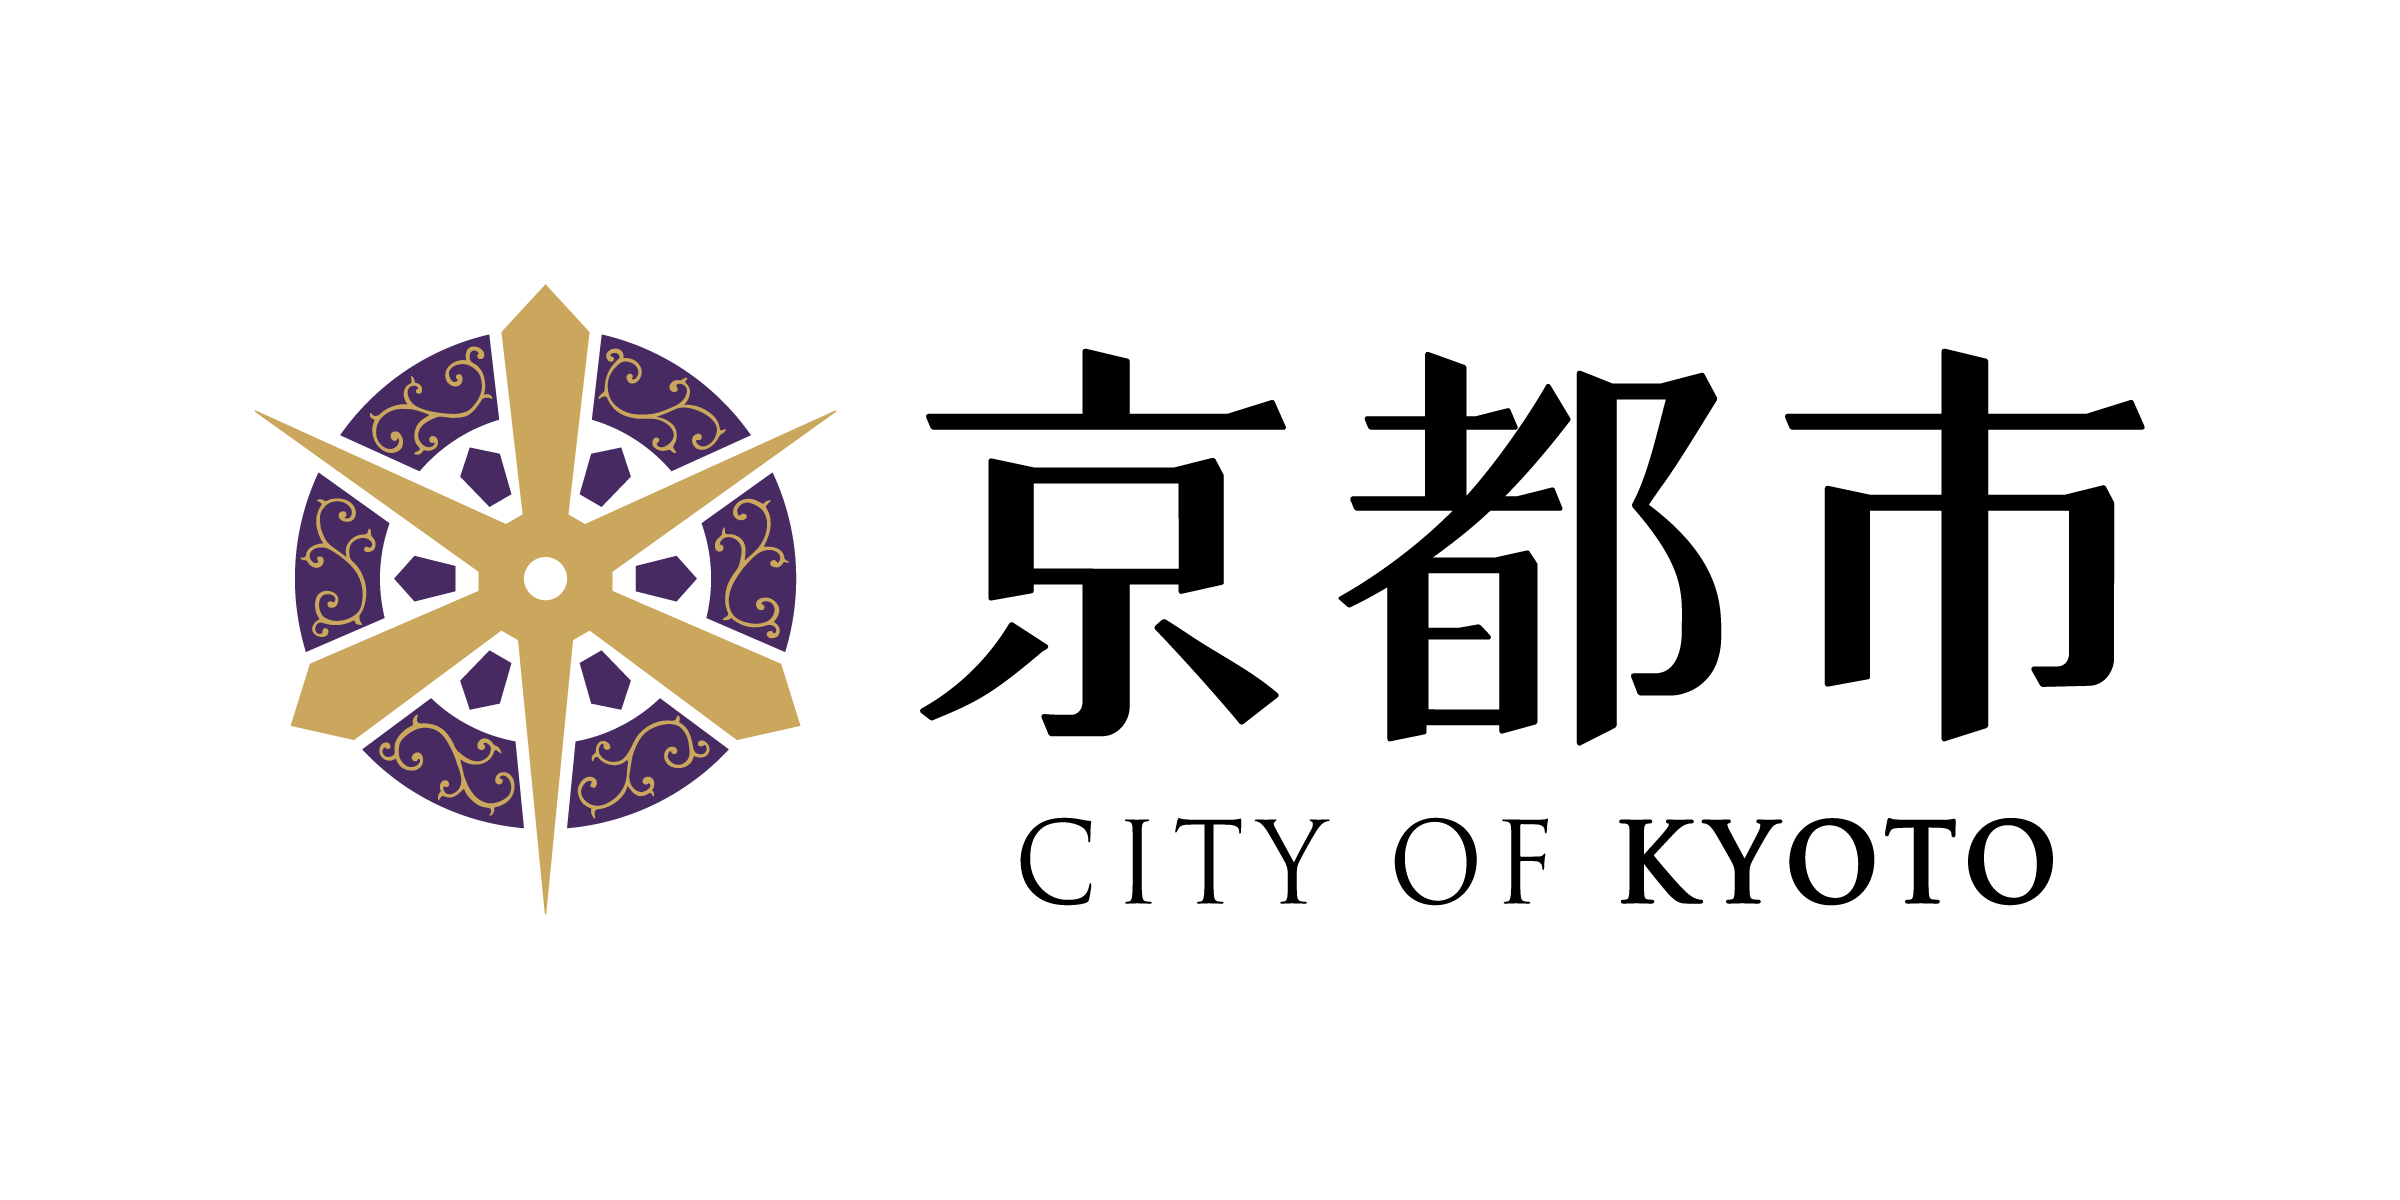 Kyoto City official website